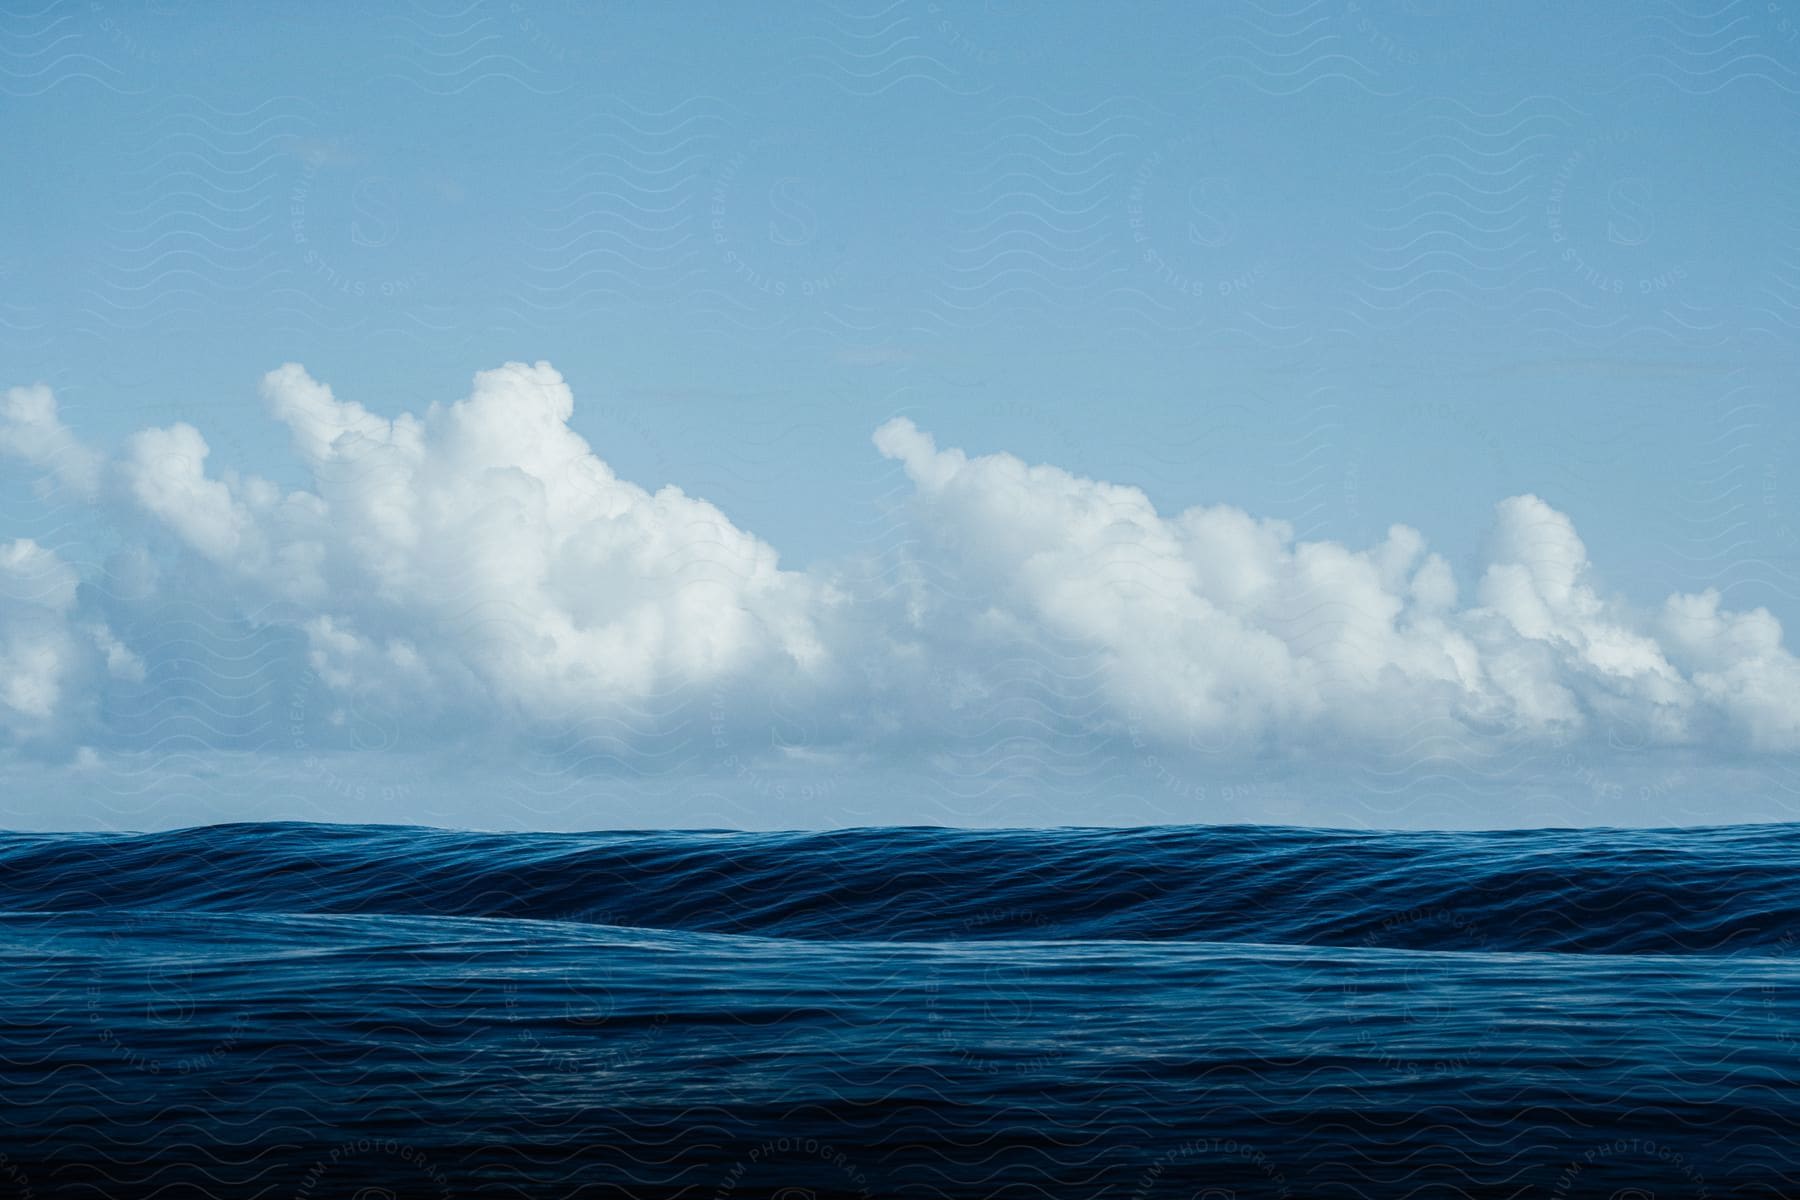 Ocean wave rolling gracefully on the waters surface